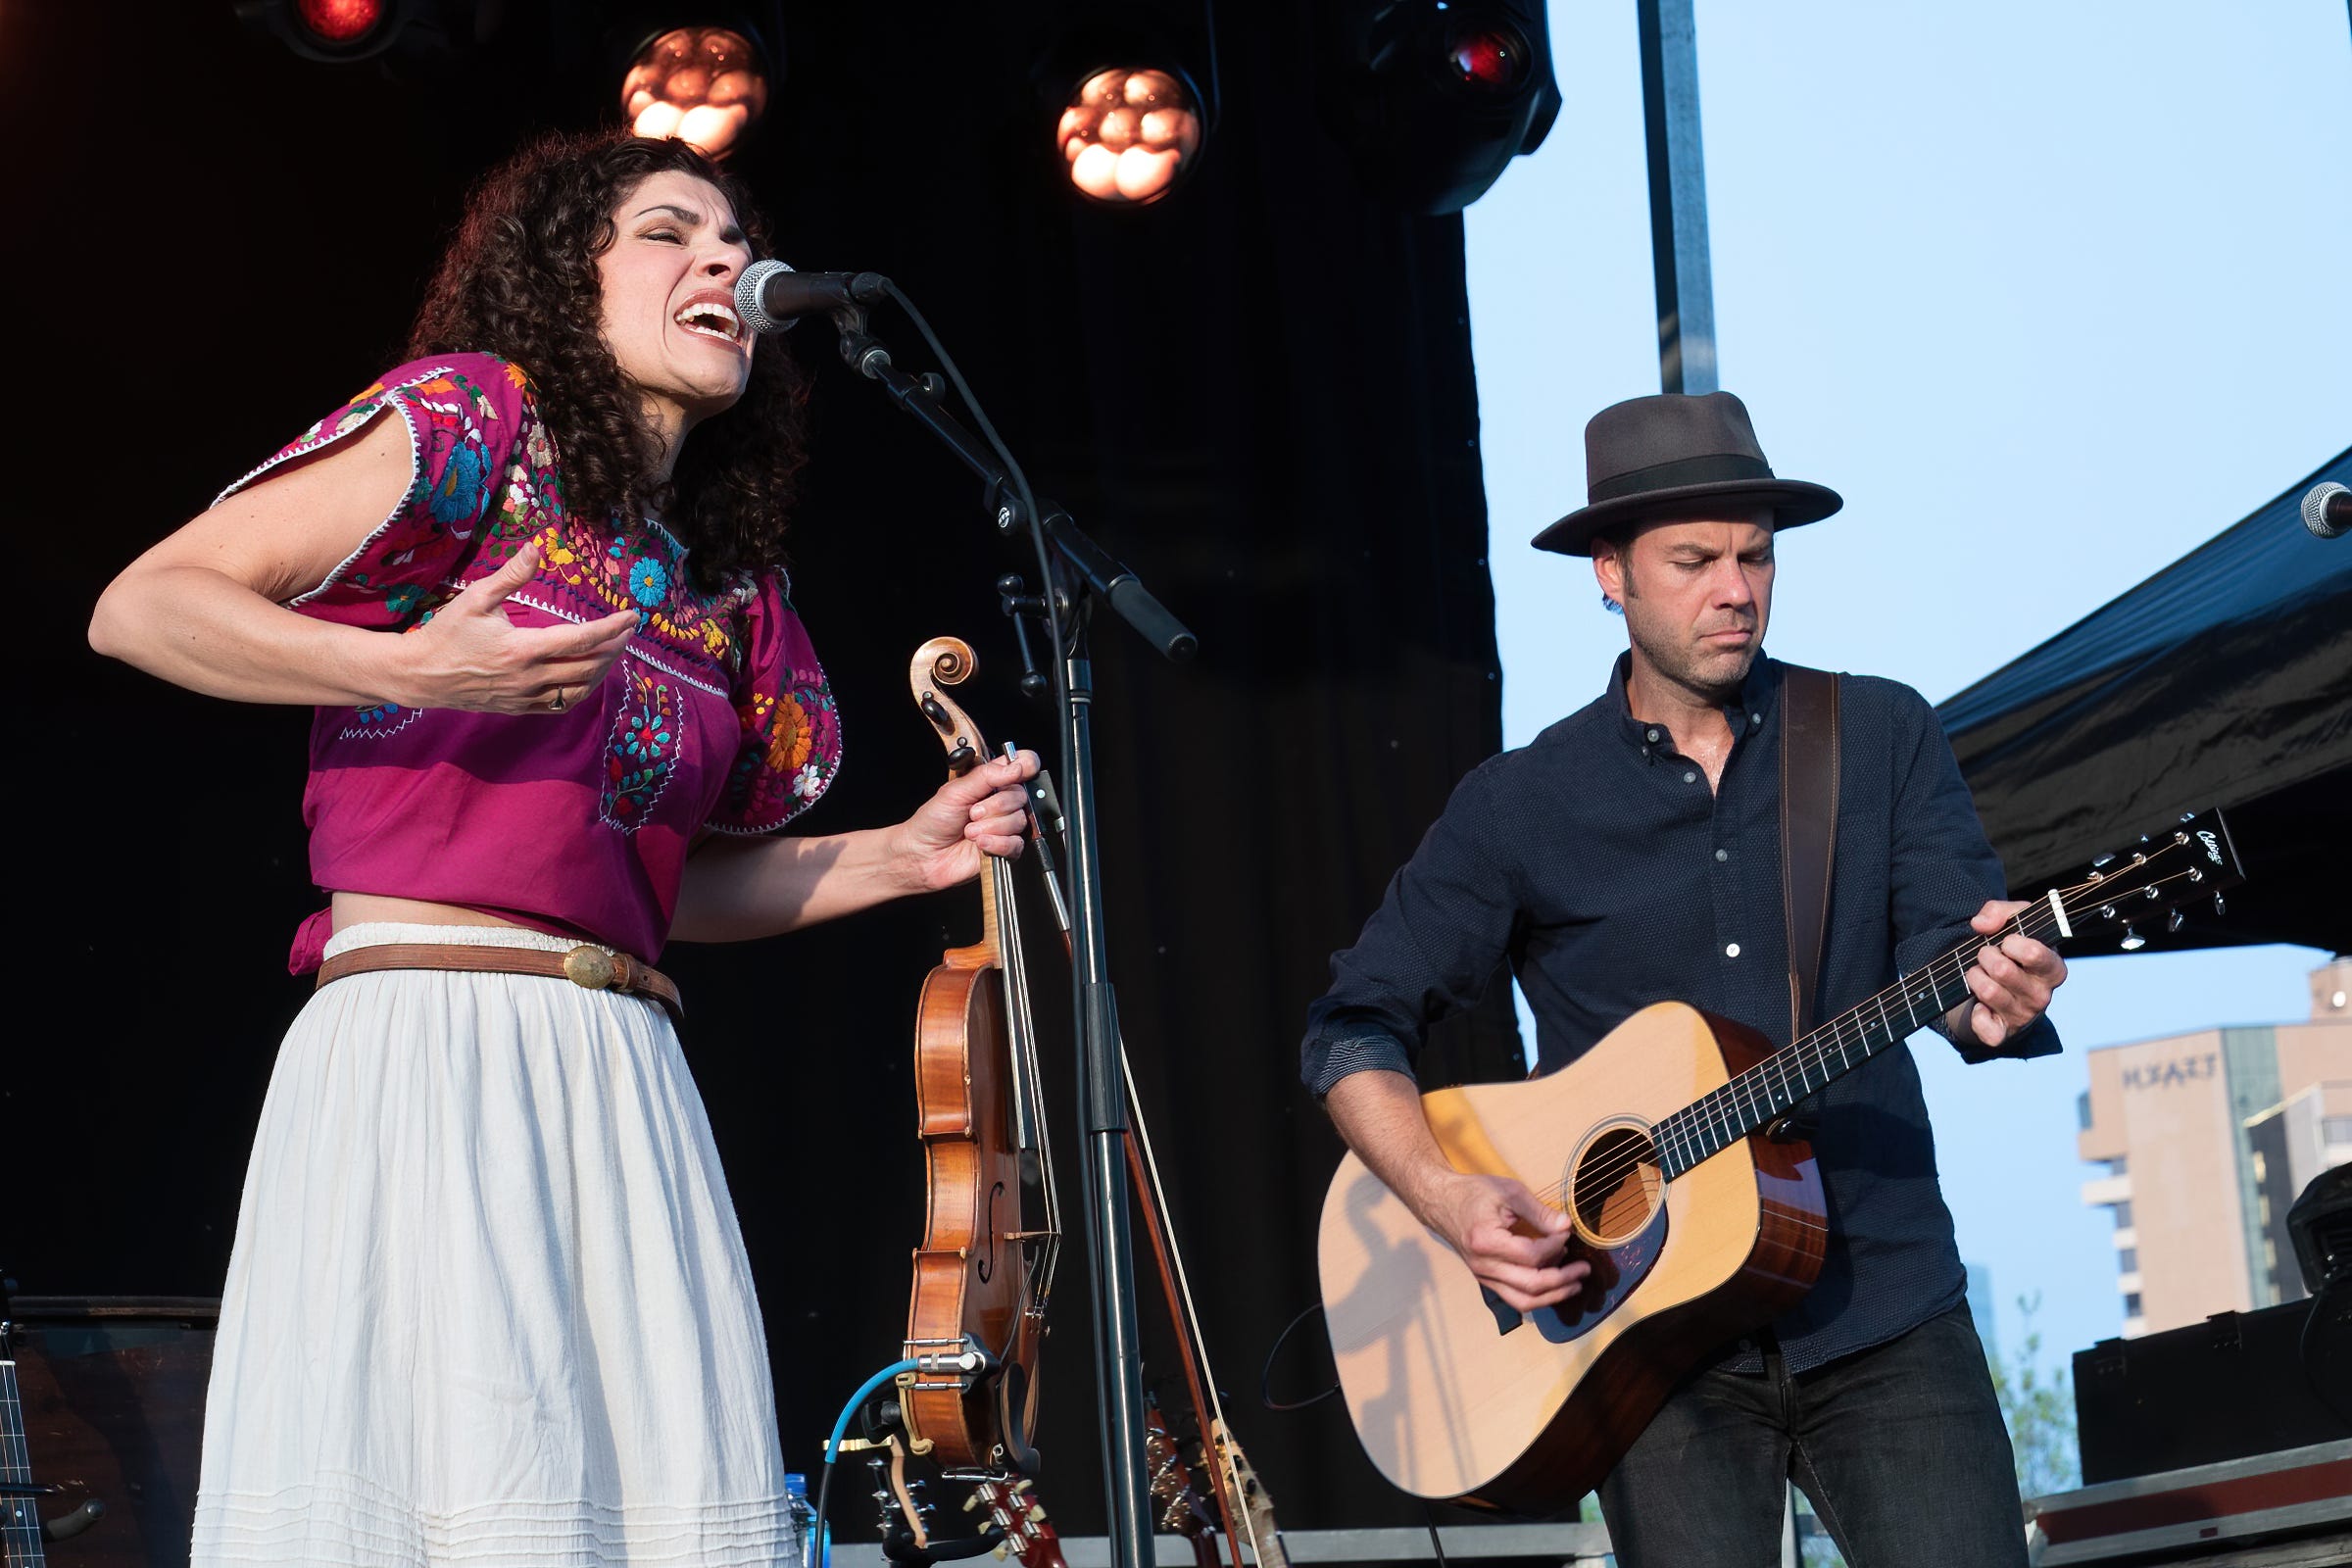 Carrie Rodriguez and Luke Jacobs, shown here performing at the Long Center Lawn on March 27, worked together on "From Texas With Love," a new video series premiering Wednesday that features Rodriguez performing musical collaborations with other prominent local musicians.